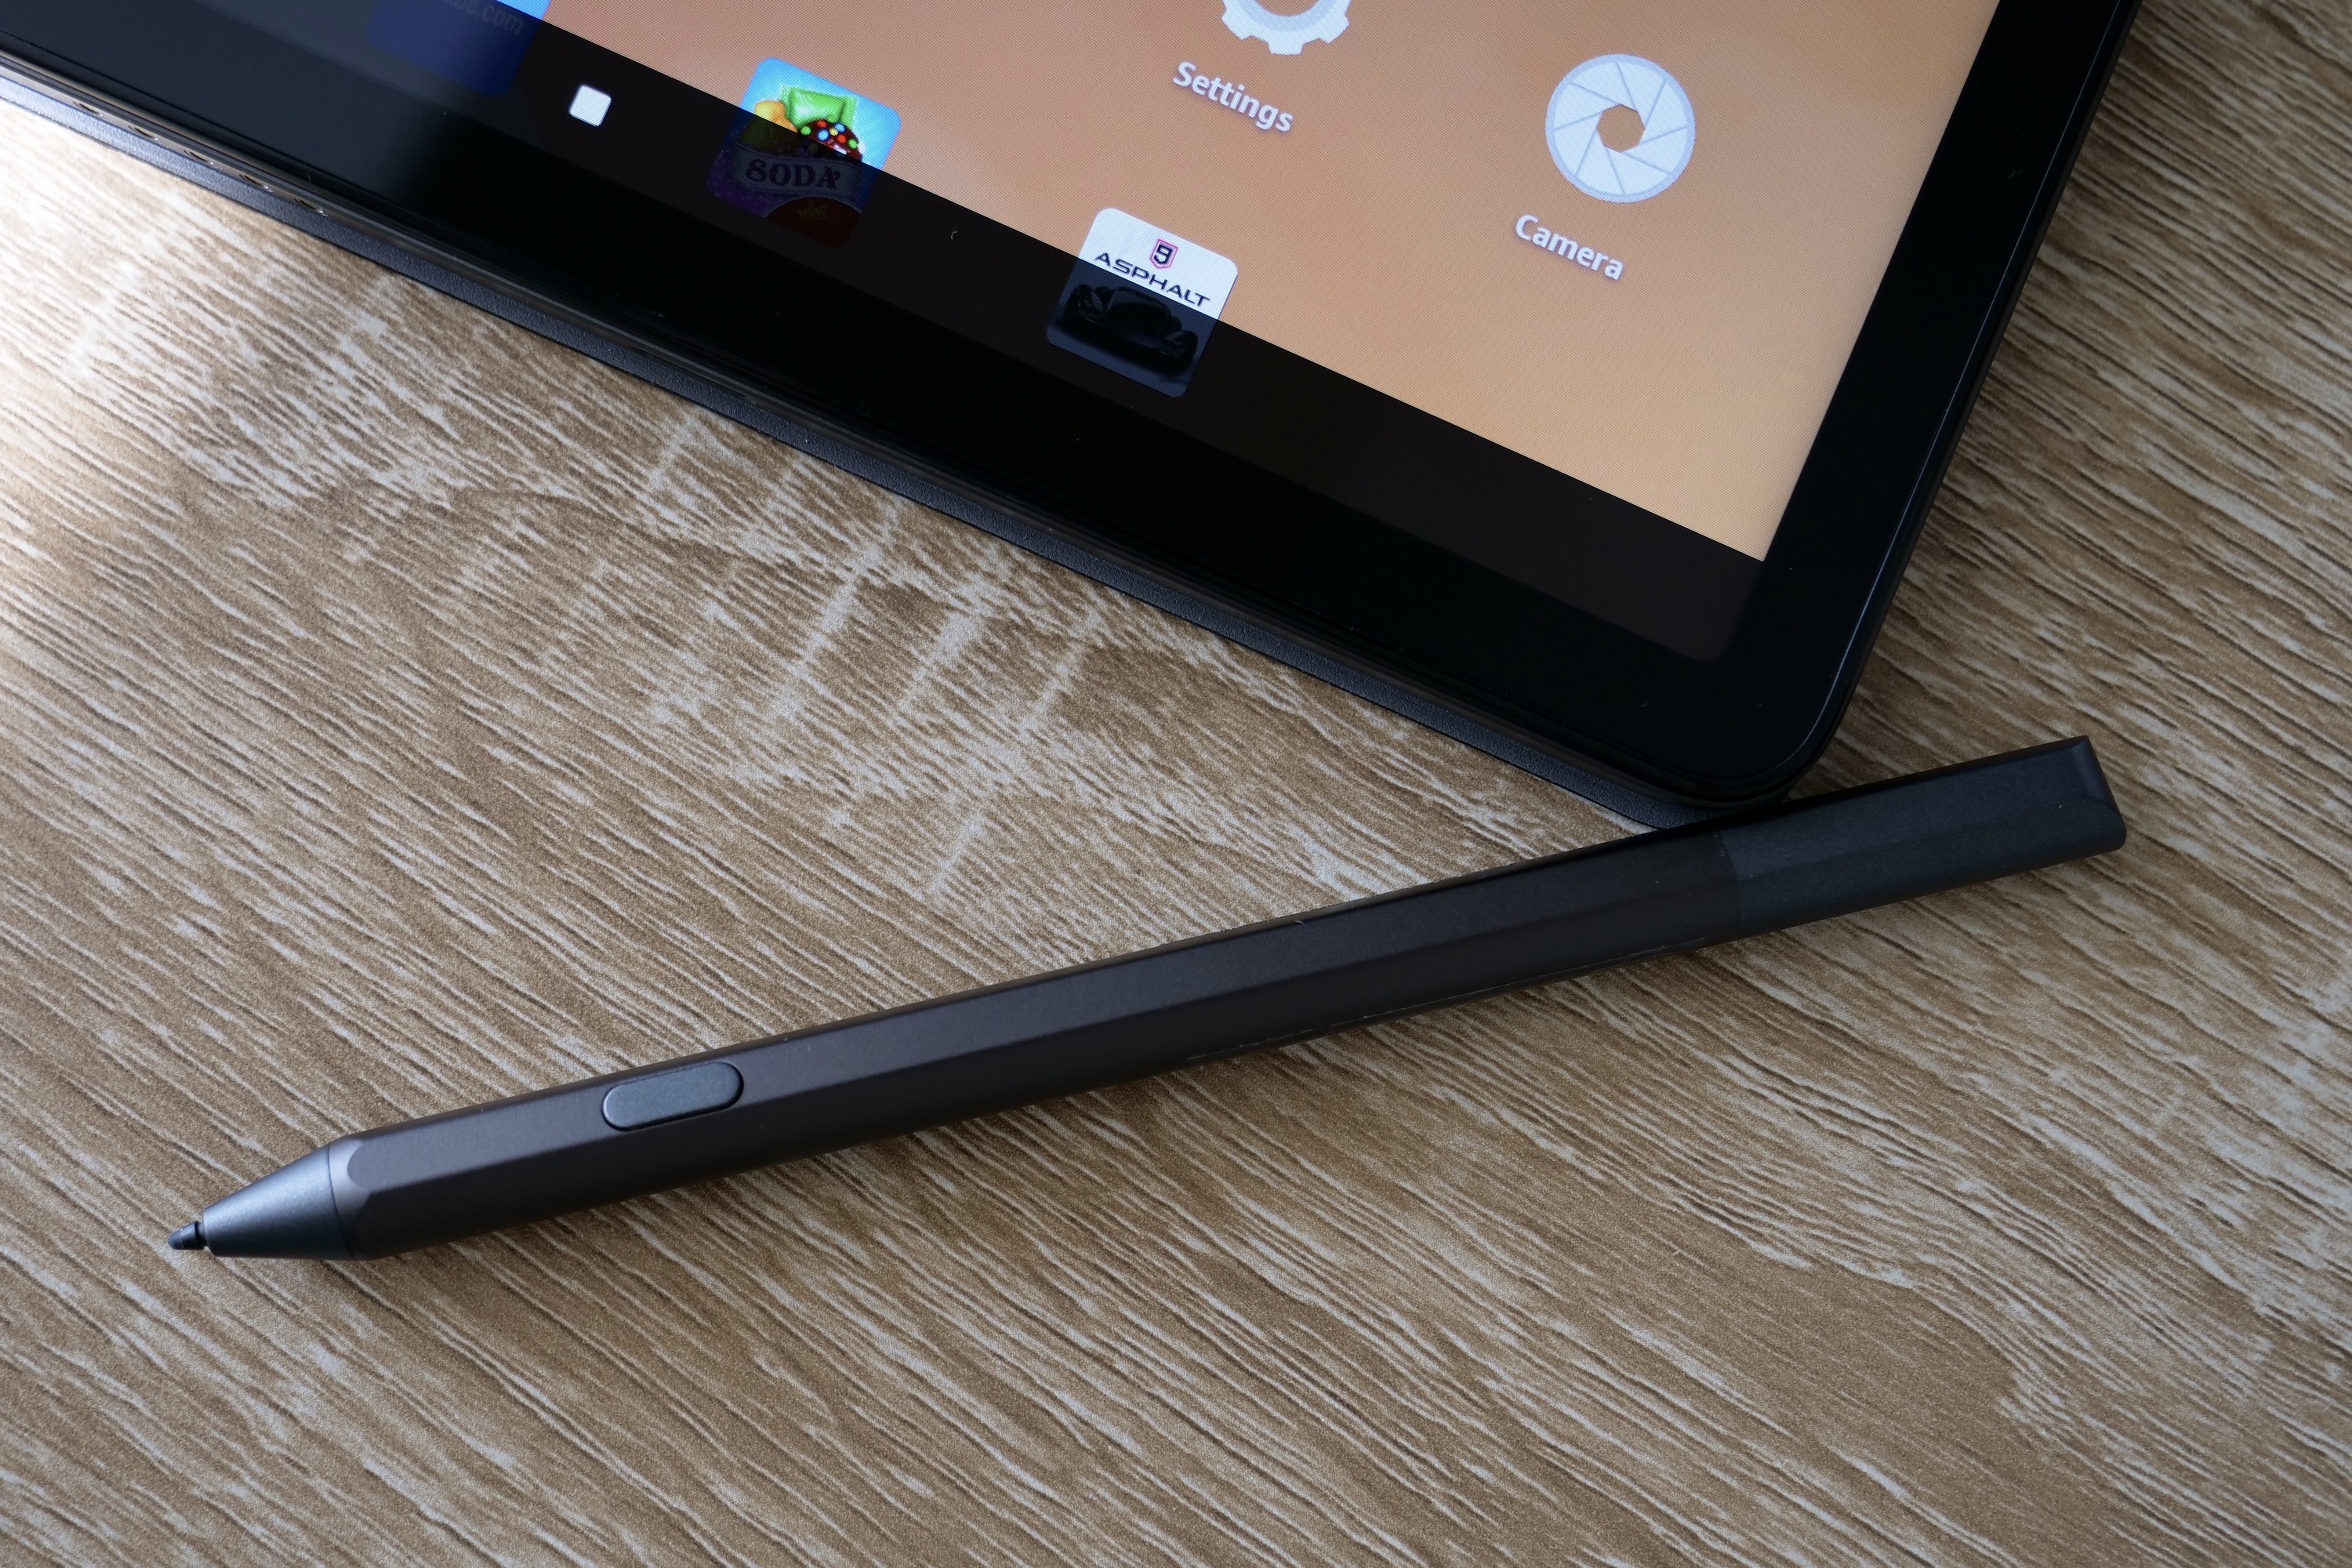 Fire Max 11 review: not the productivity tablet you're